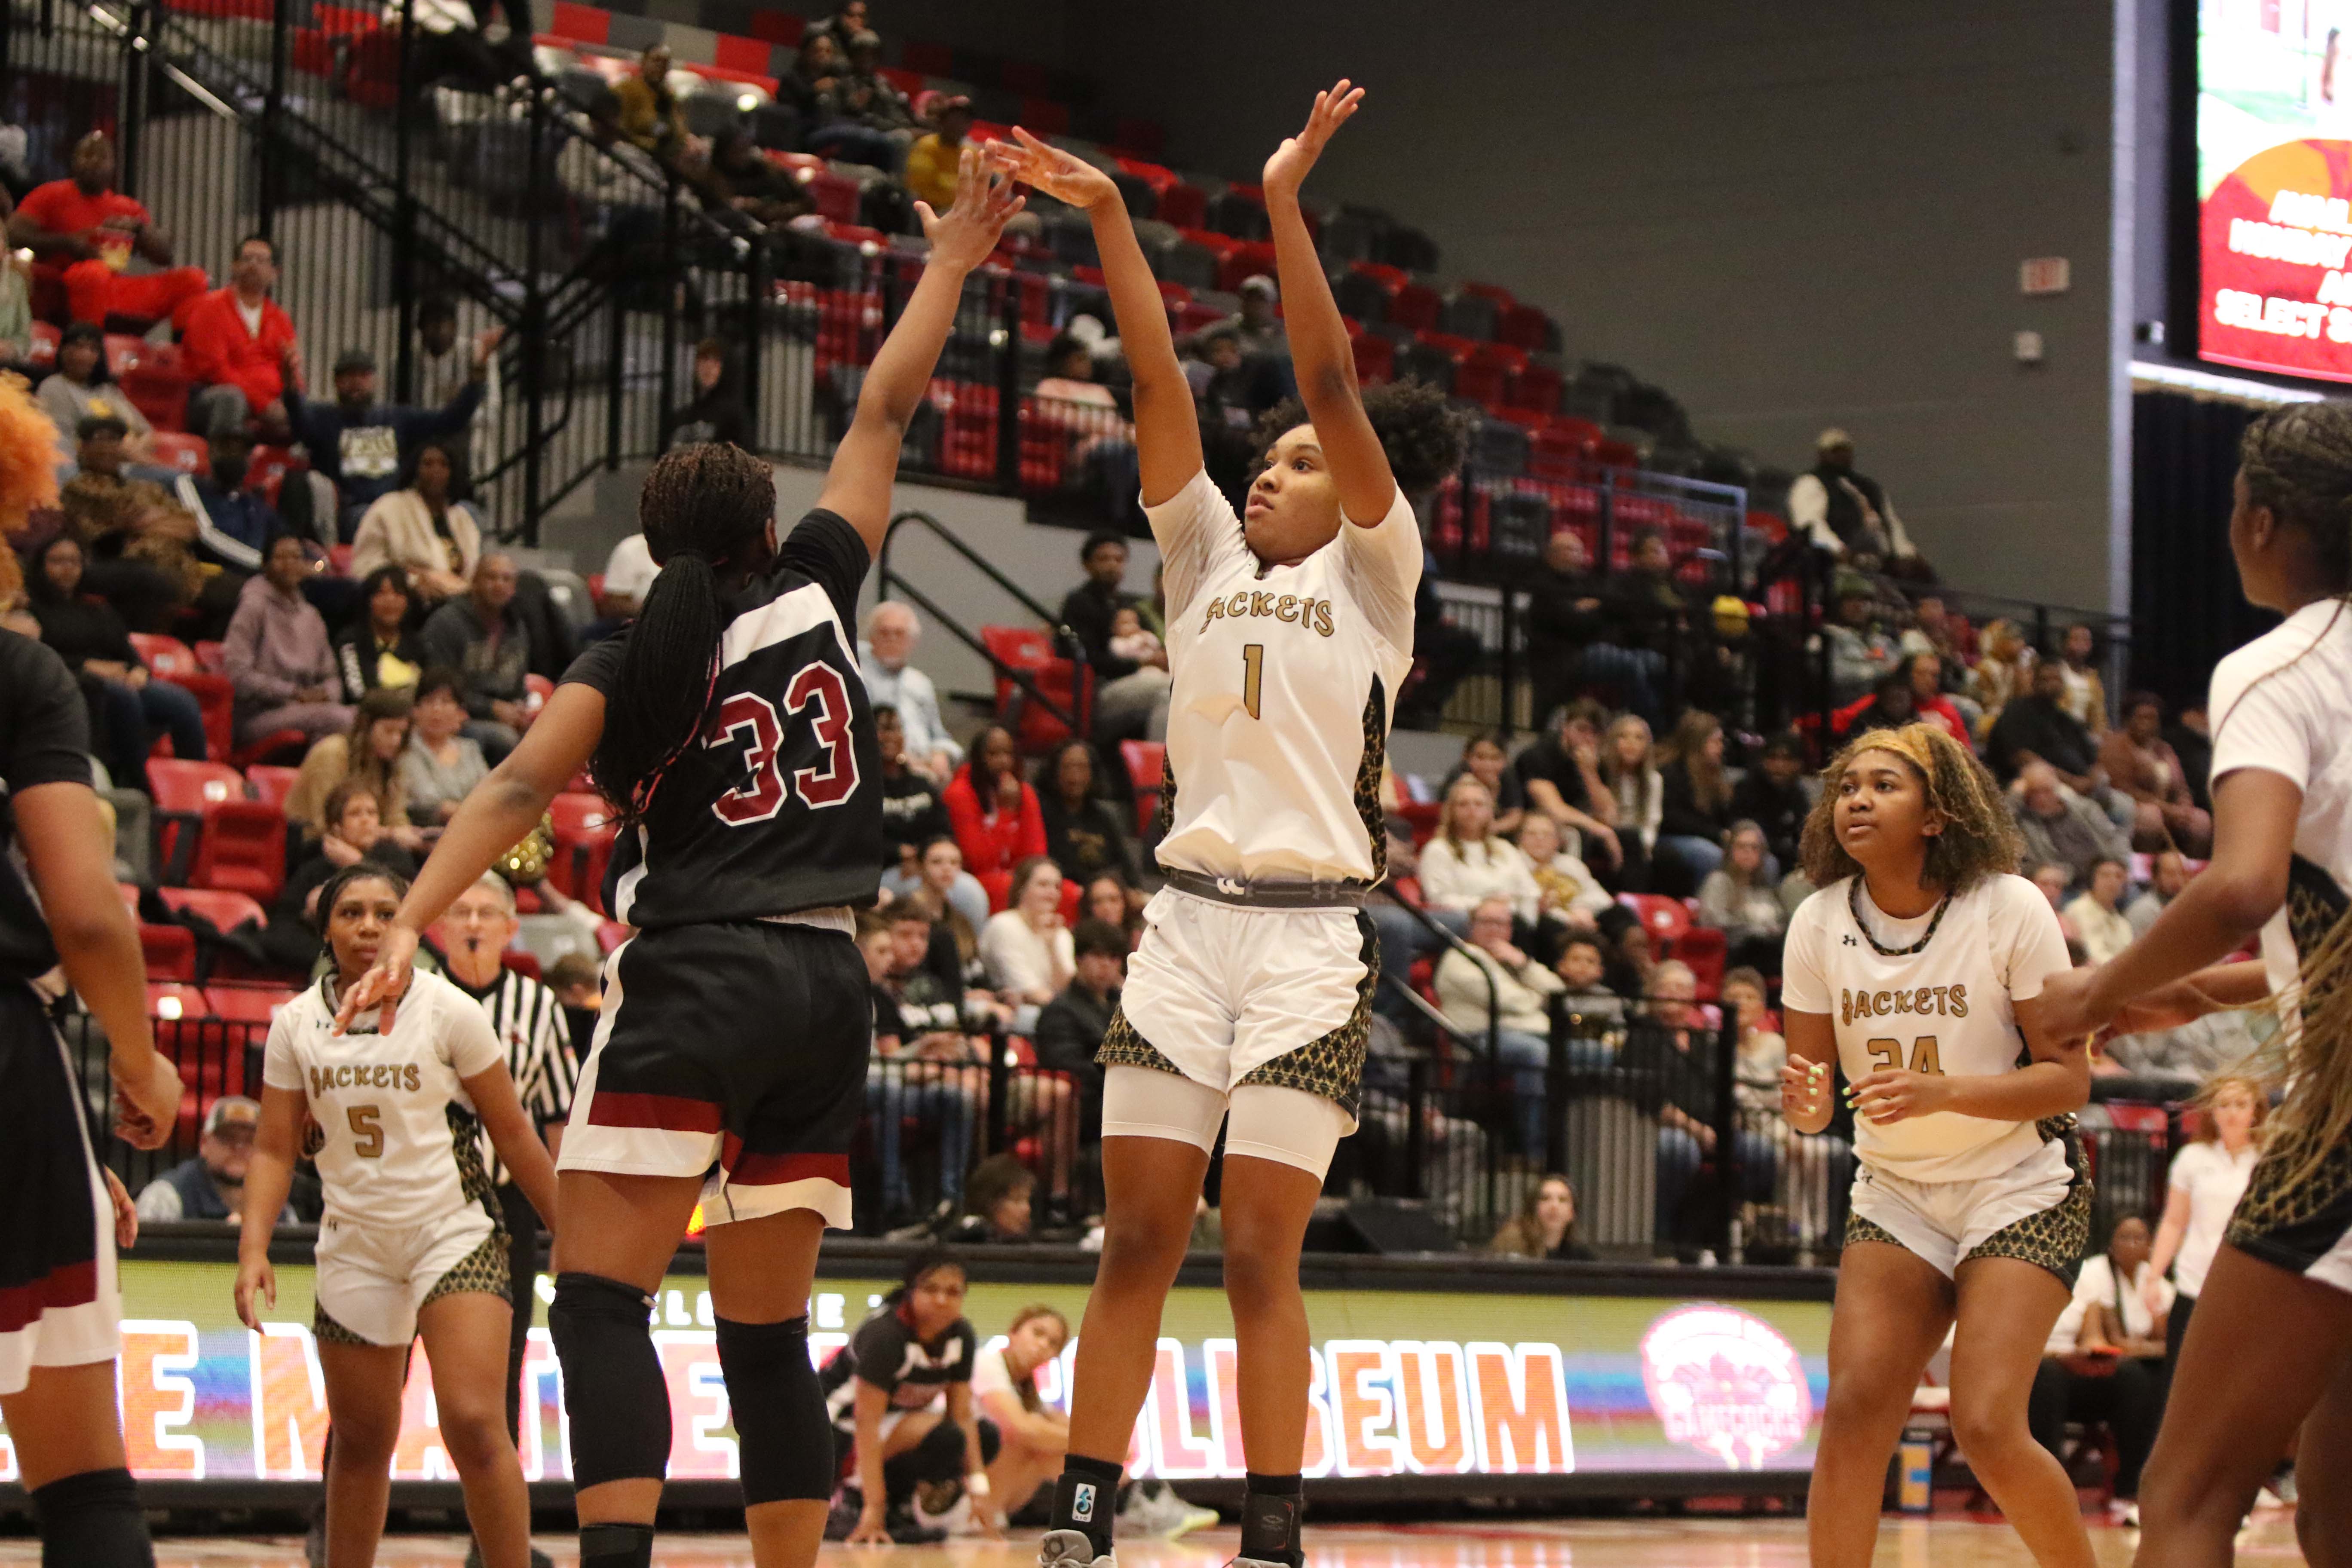 Oxford’s Xai Whitfield launches a jumper against Anniston in the Calhoun County final. She’s the East Alabama Sports Today Class 4A-6A All-Calhoun County girls’ player of the year. (Photo by Mike Lett/lettsfocus.smugmug.com)